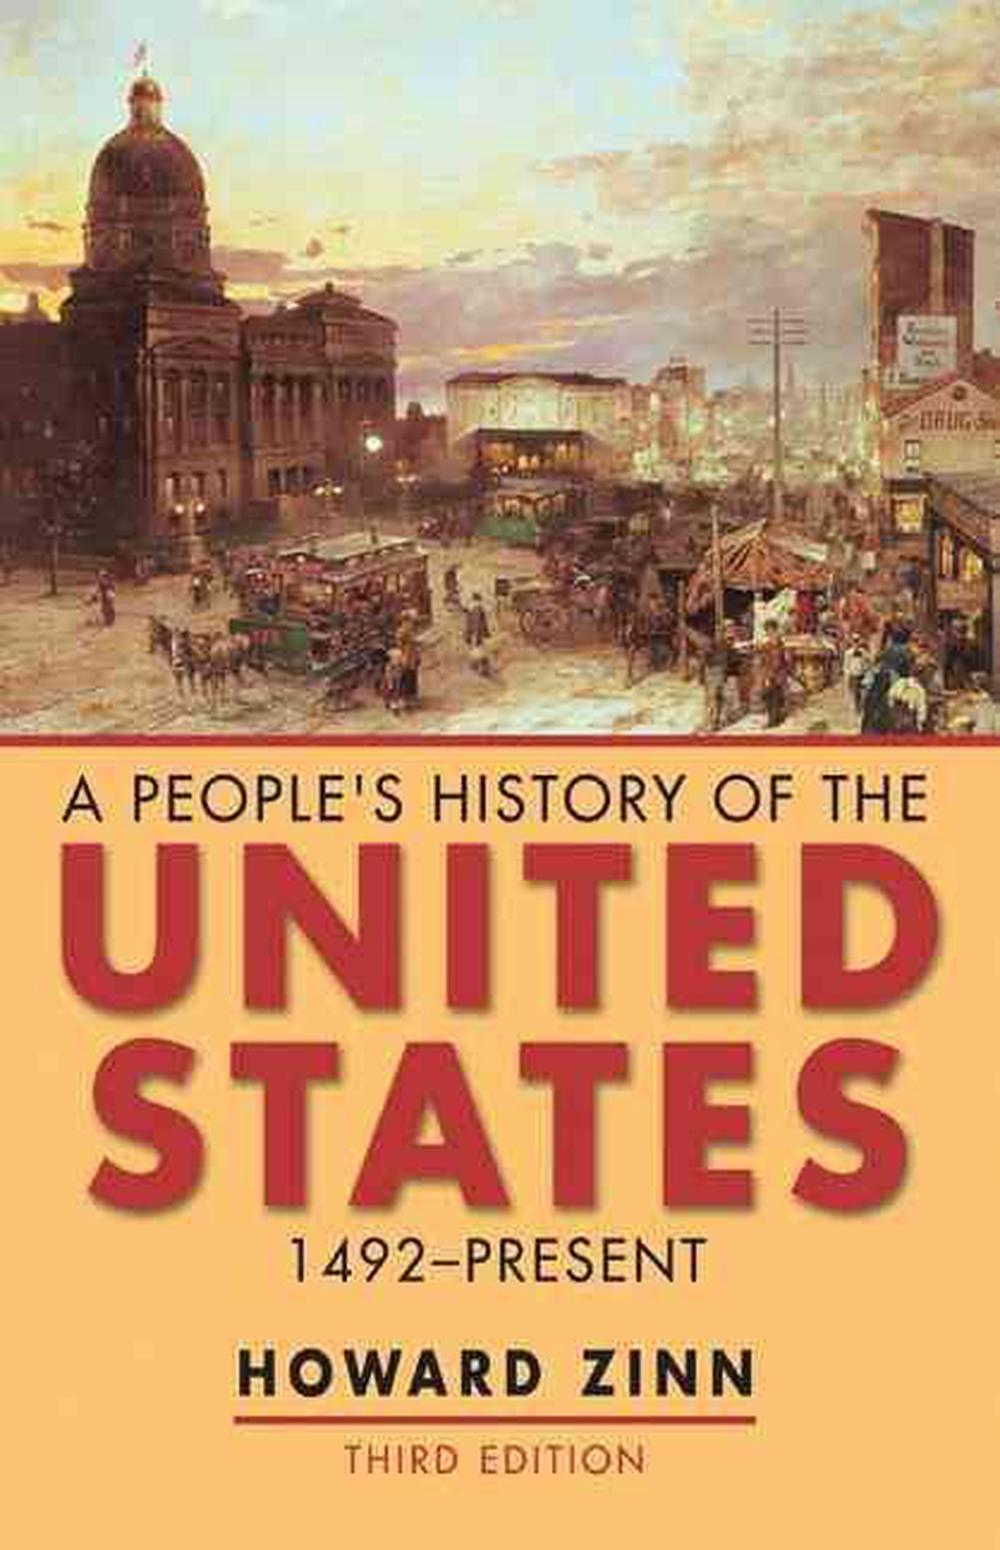 thesis of a people's history of the united states